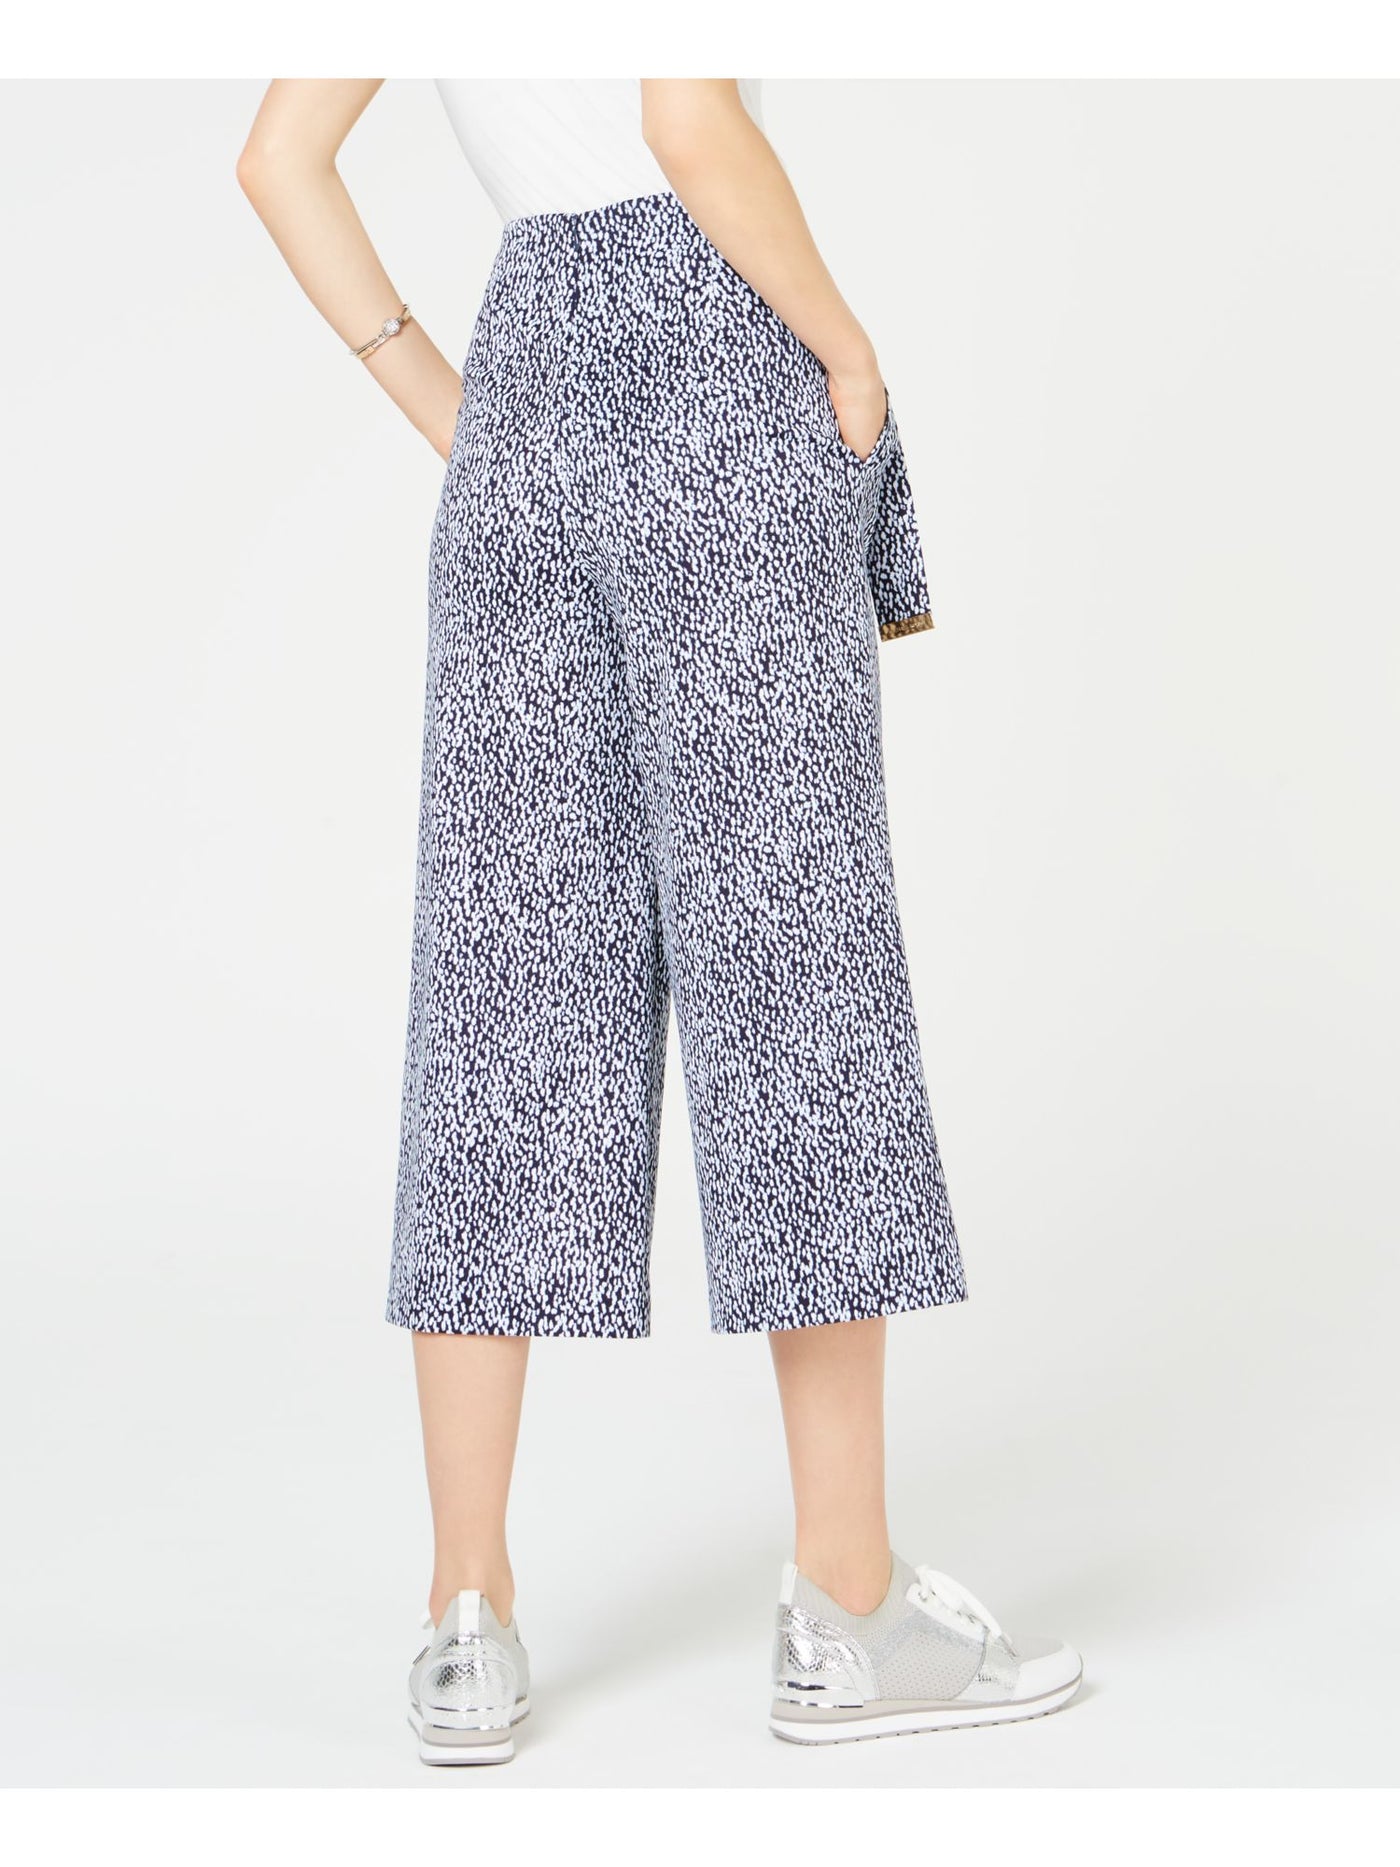 MICHAEL KORS Womens Blue Belted Printed Cropped Pants XL